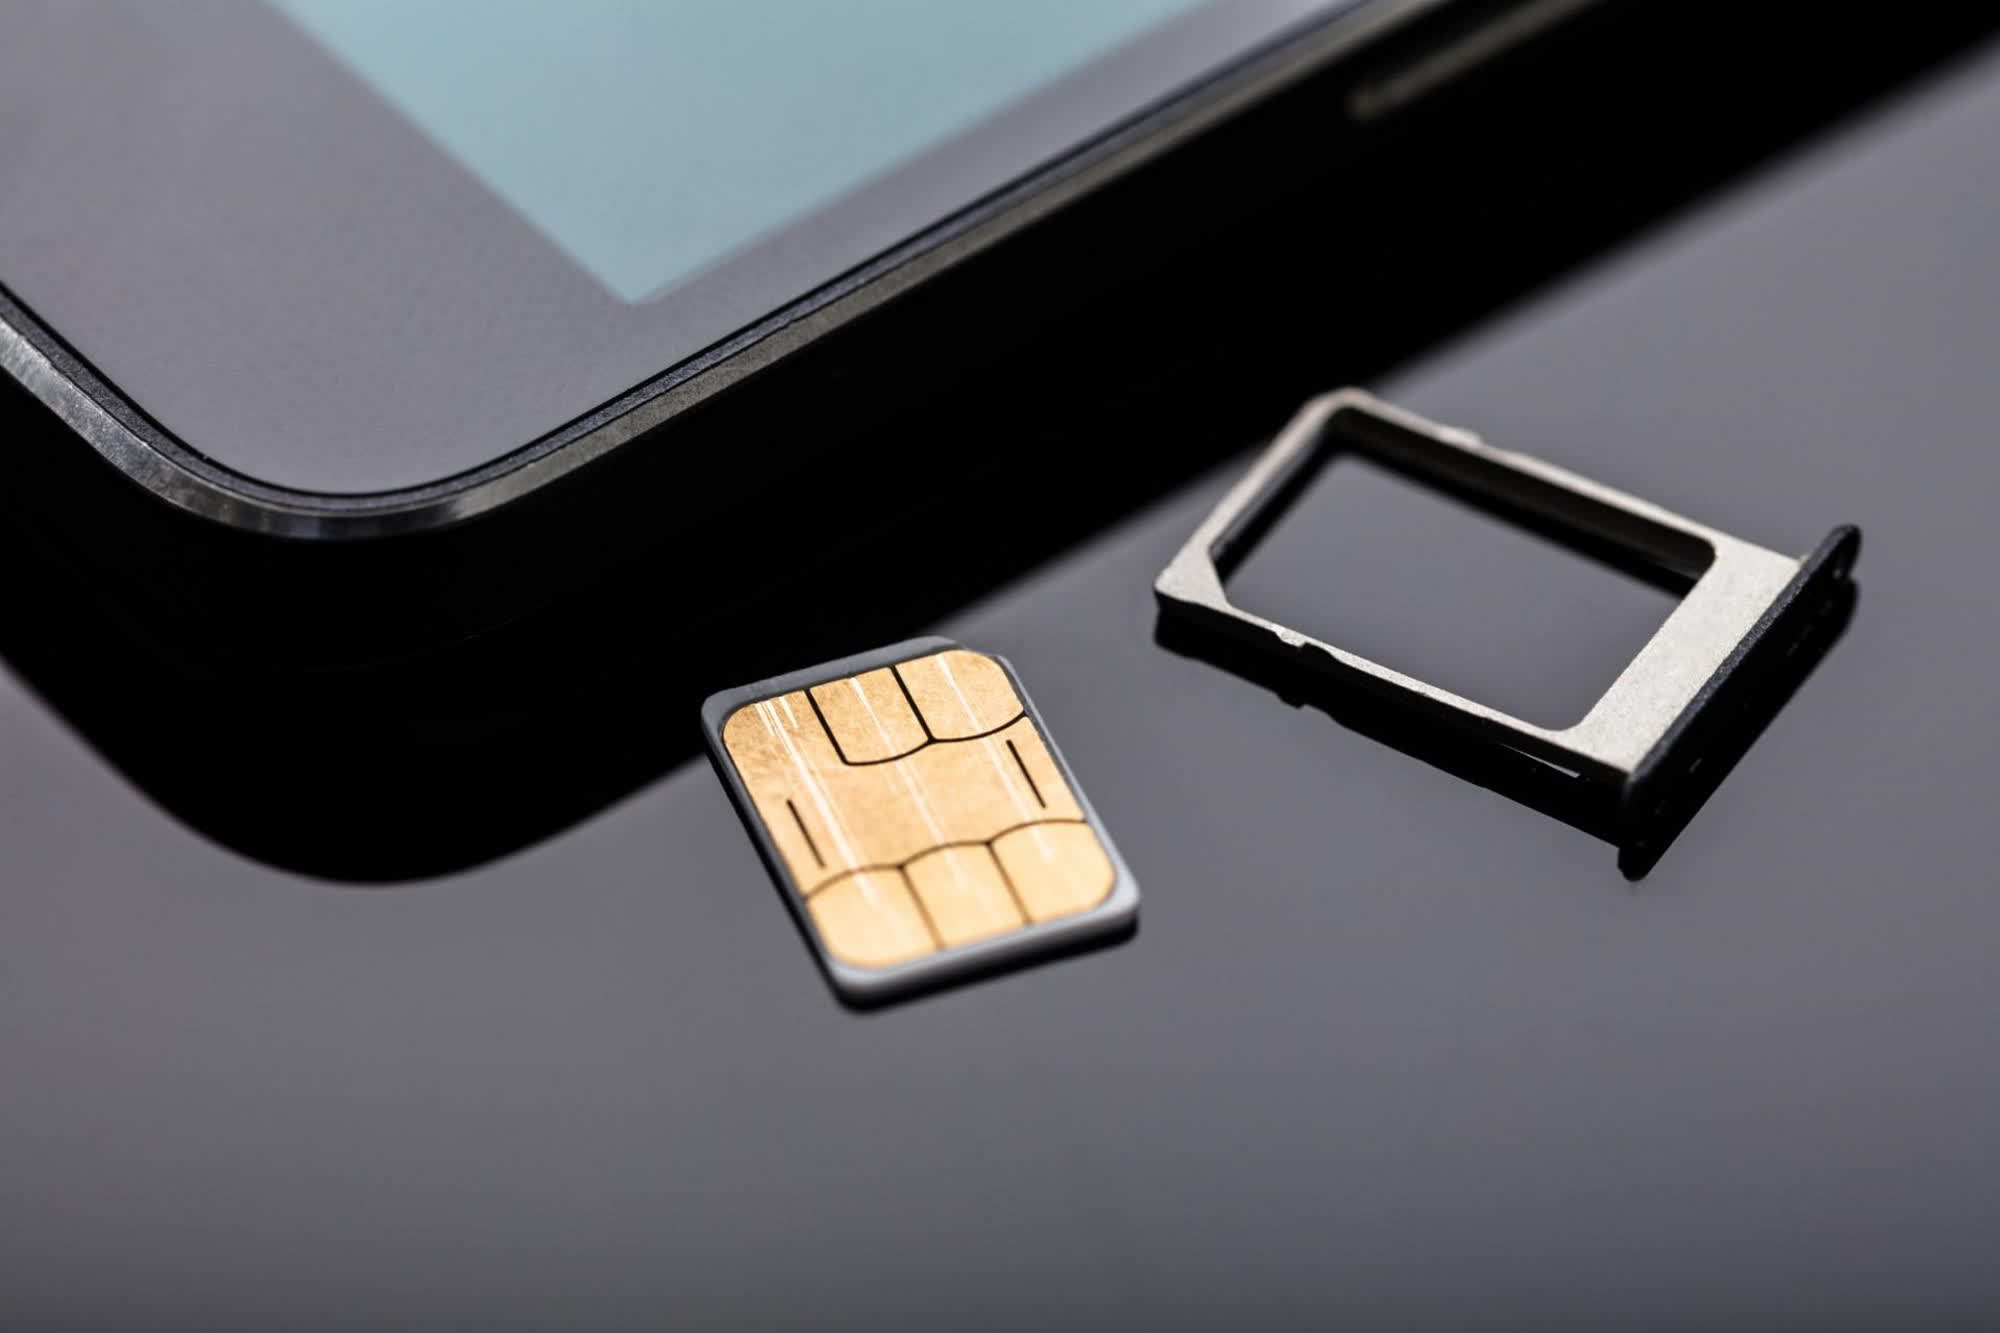 Qualcomm's Snapdragon 8 Gen 2 SoC features iSIM silicon to replace SIM cards and eSIM chips